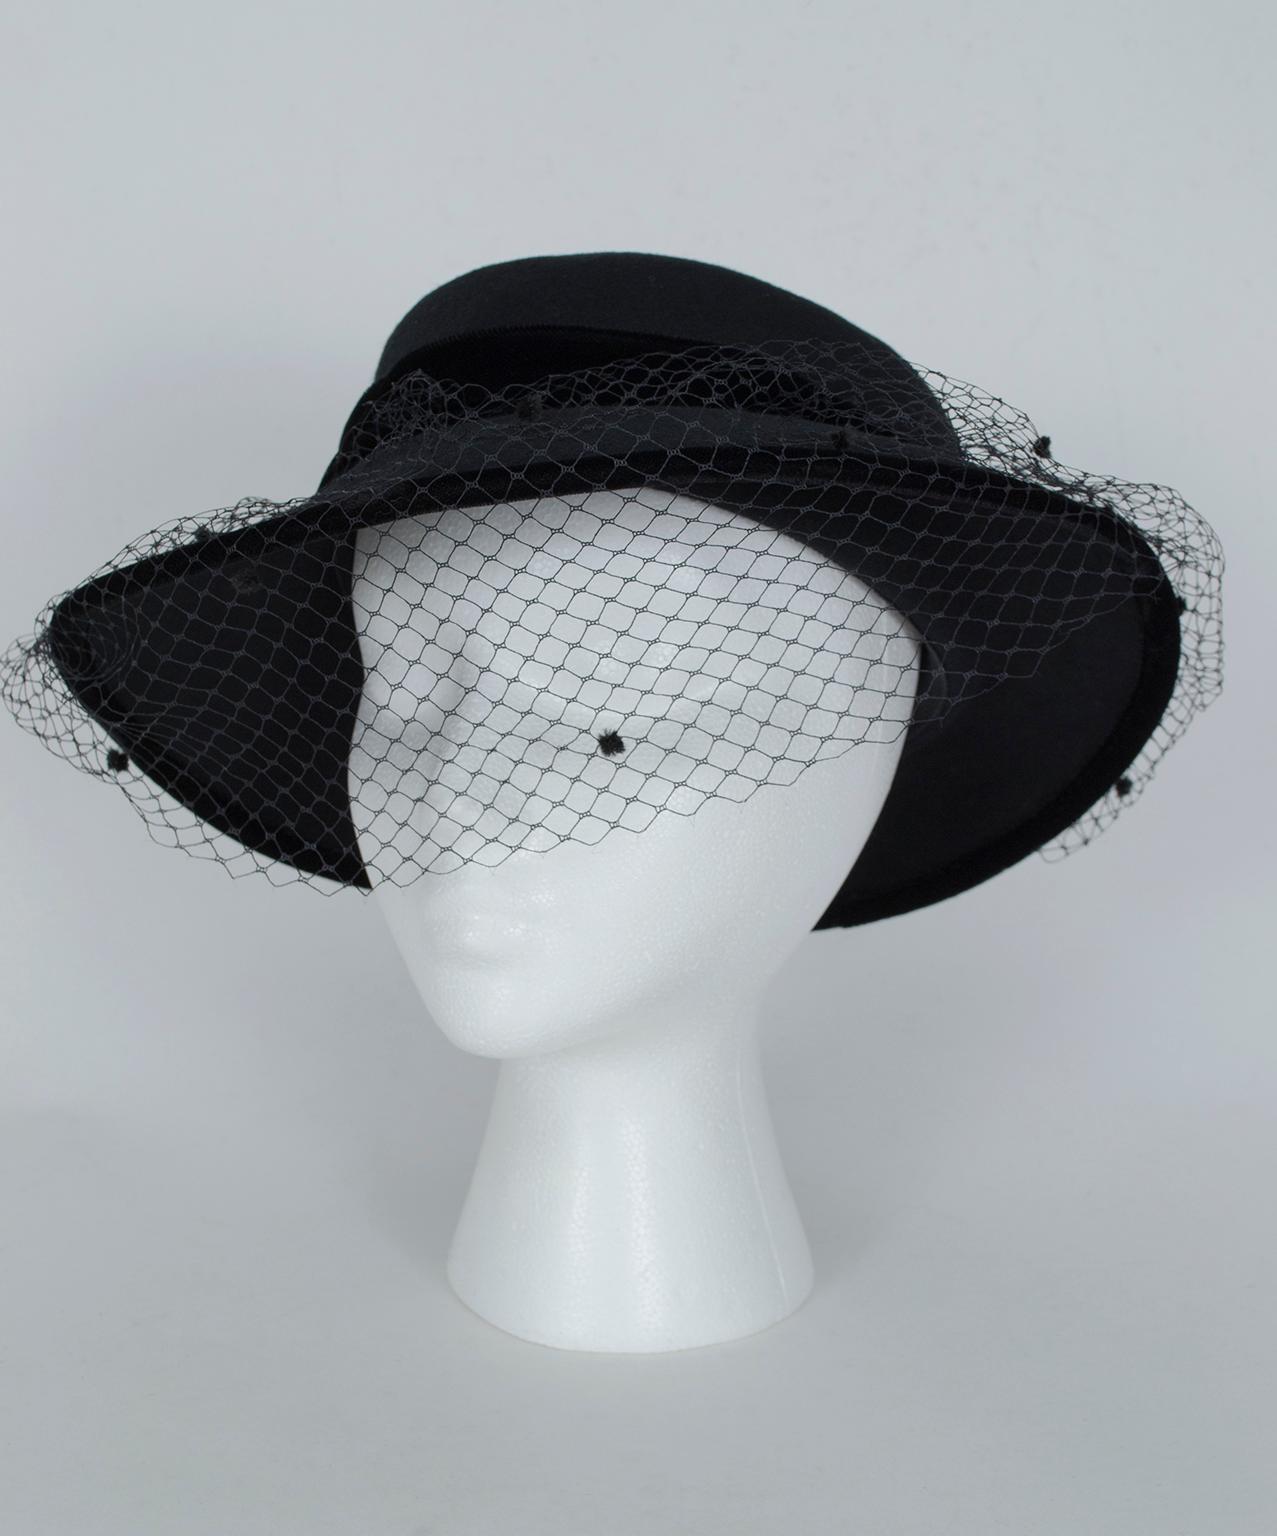 One of the premiere luxury milliners of the 20th century, Marzi still makes the Florentine straw hats young Englishwomen coveted over 100 years ago on their Grand Tours of Europe. With its tasteful yet somber veil, this one reminds us of the hat